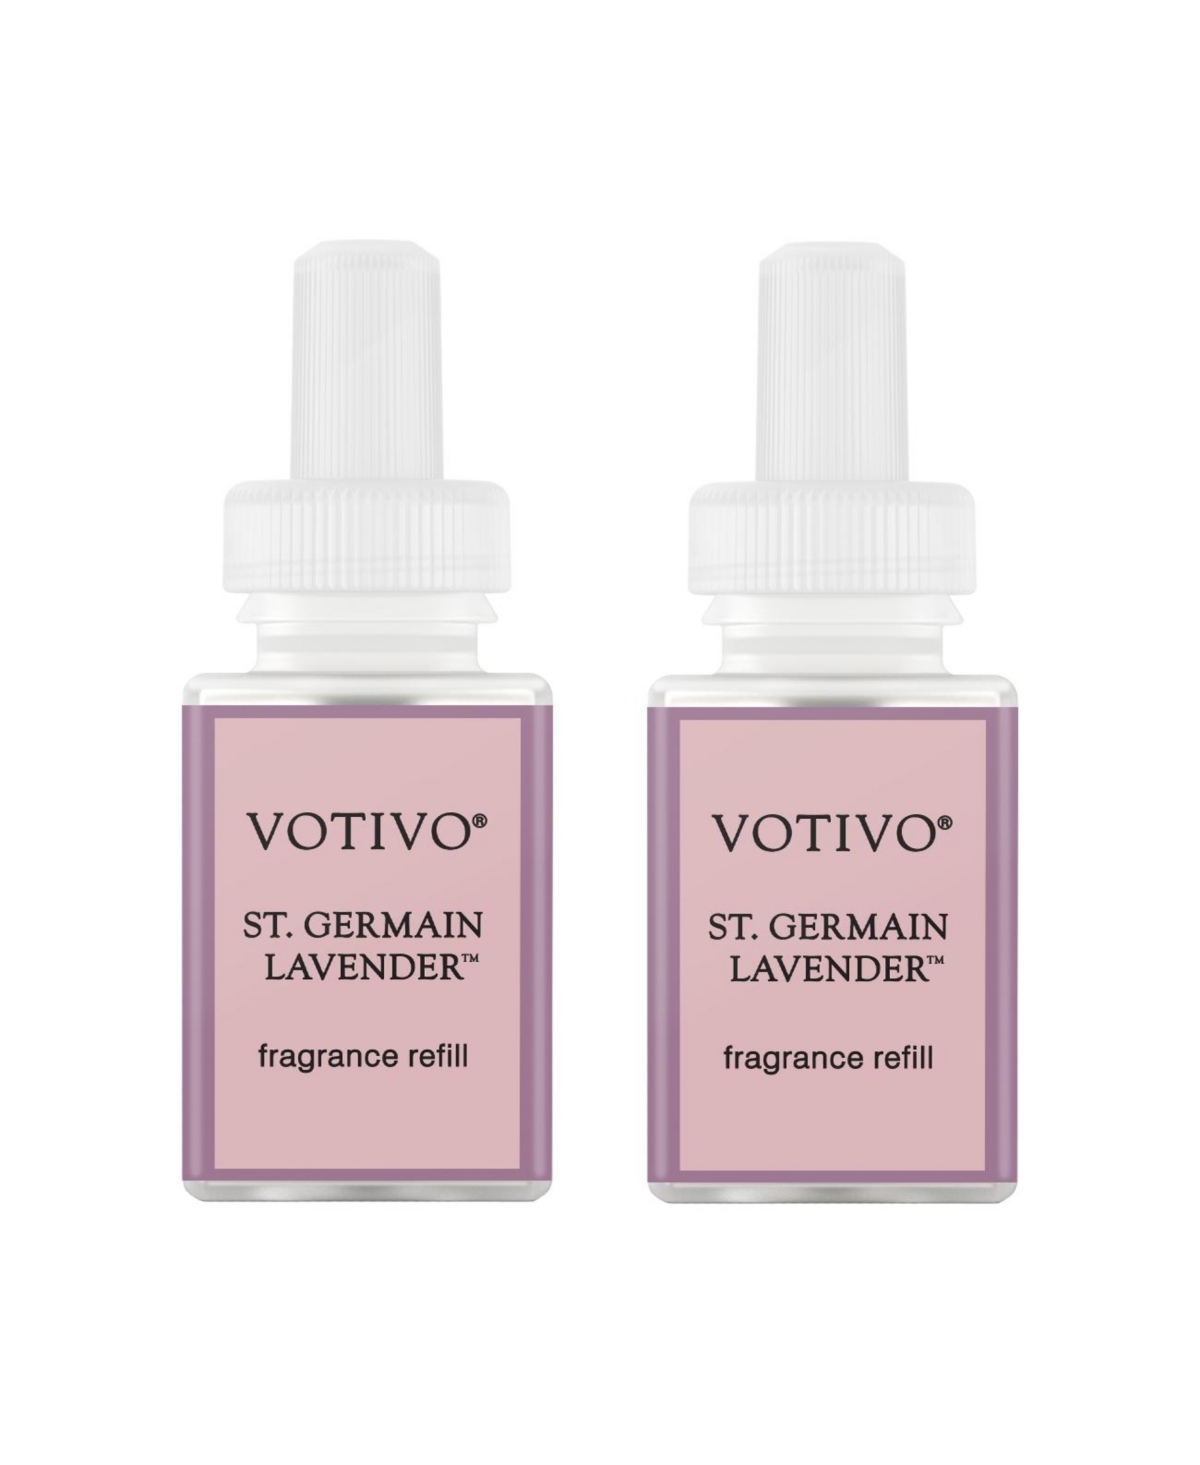 and Votivo - St. Germain Lavender - Fragrance for Smart Home Air Diffusers - Room Freshener - Aromatherapy Scents for Bedrooms & Living Rooms - O